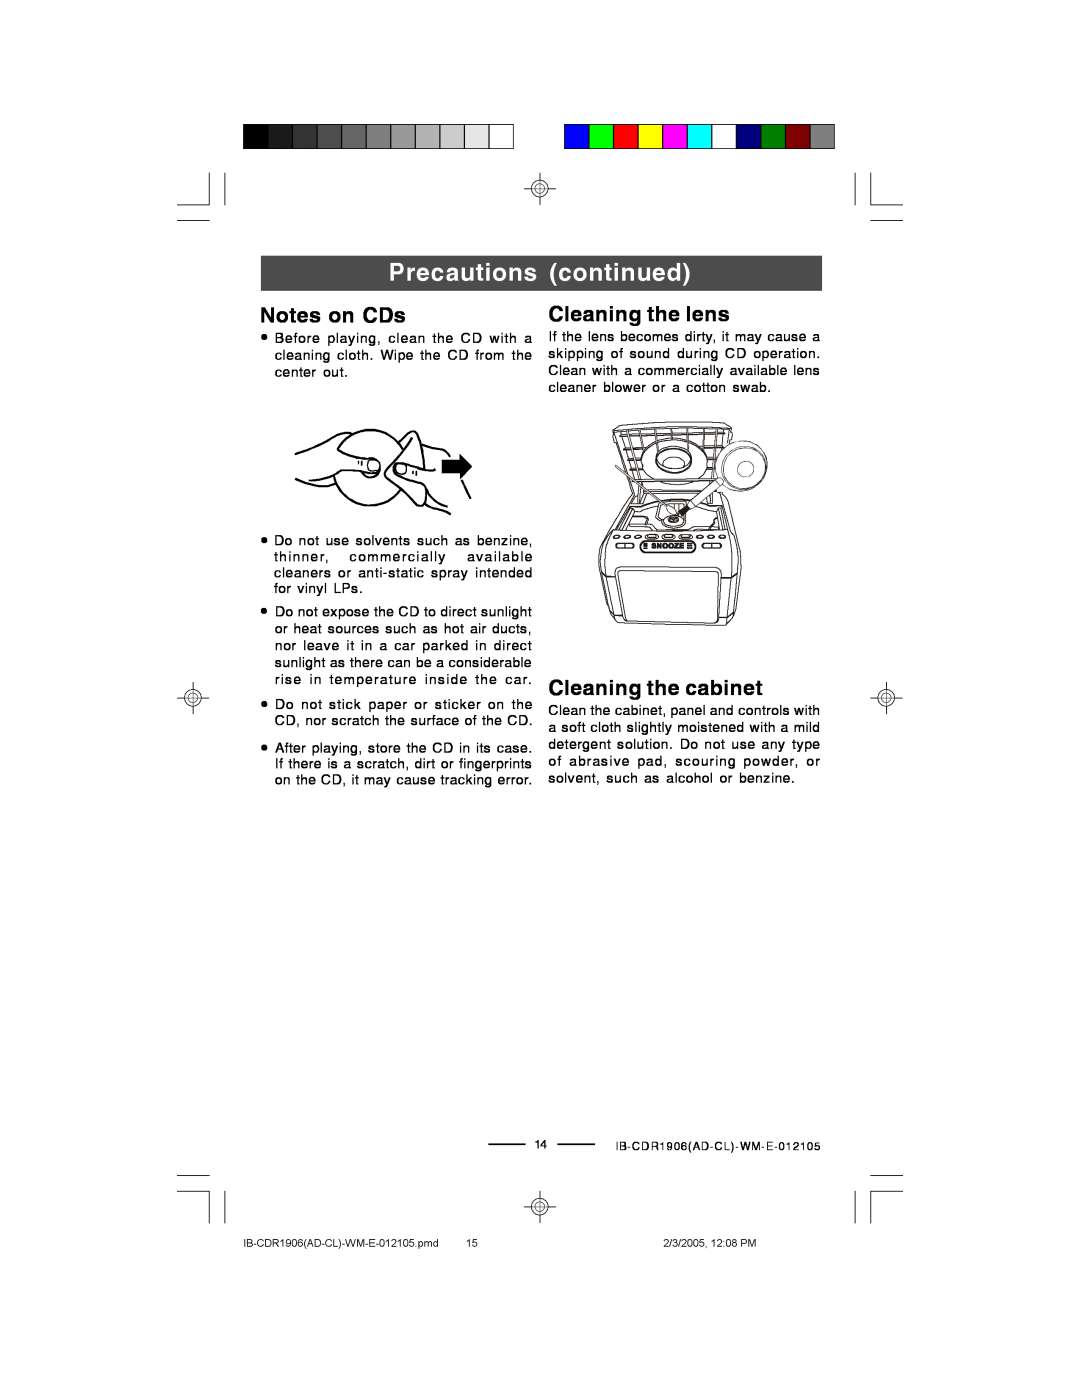 Lenoxx Electronics CDR1906 manual Precautions continued, Notes on CDs, Cleaning the lens, Cleaning the cabinet 